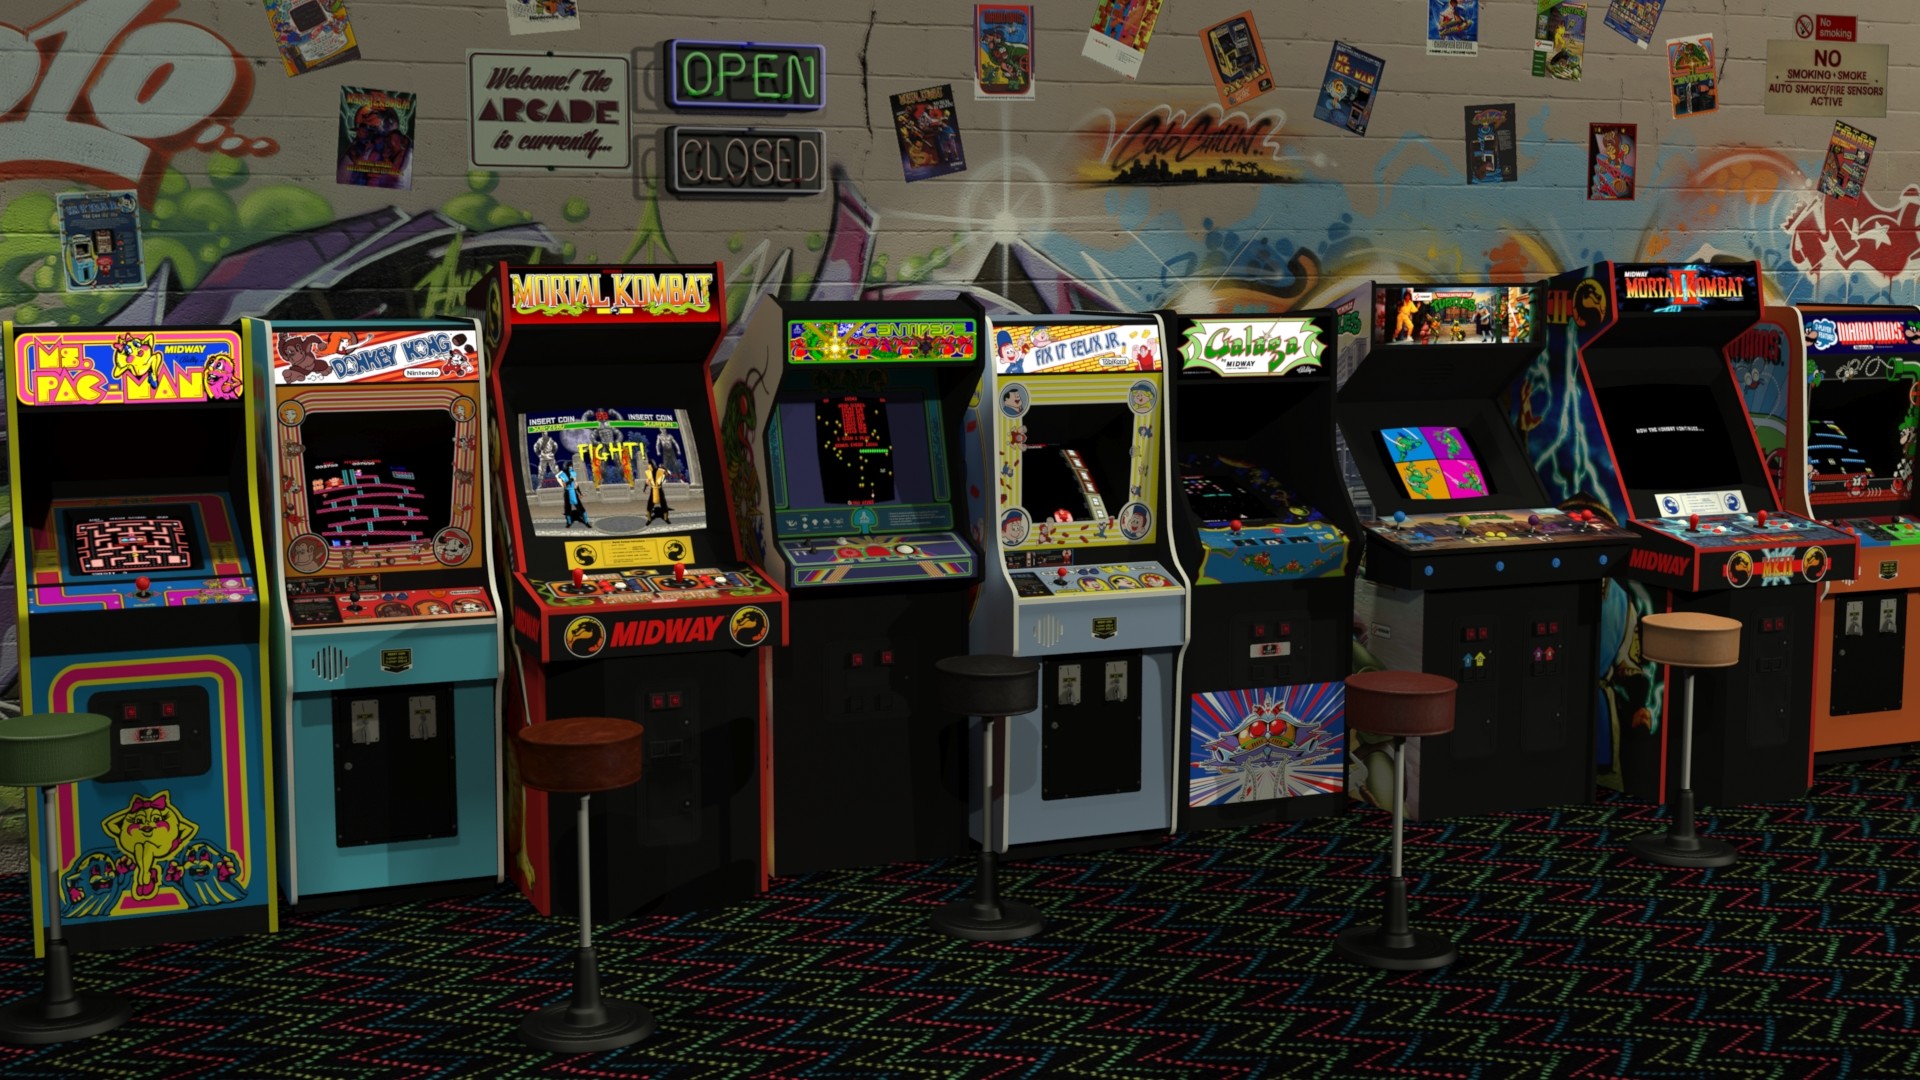 1920x1080 A great find of old arcade games has ended up in "tragedy"